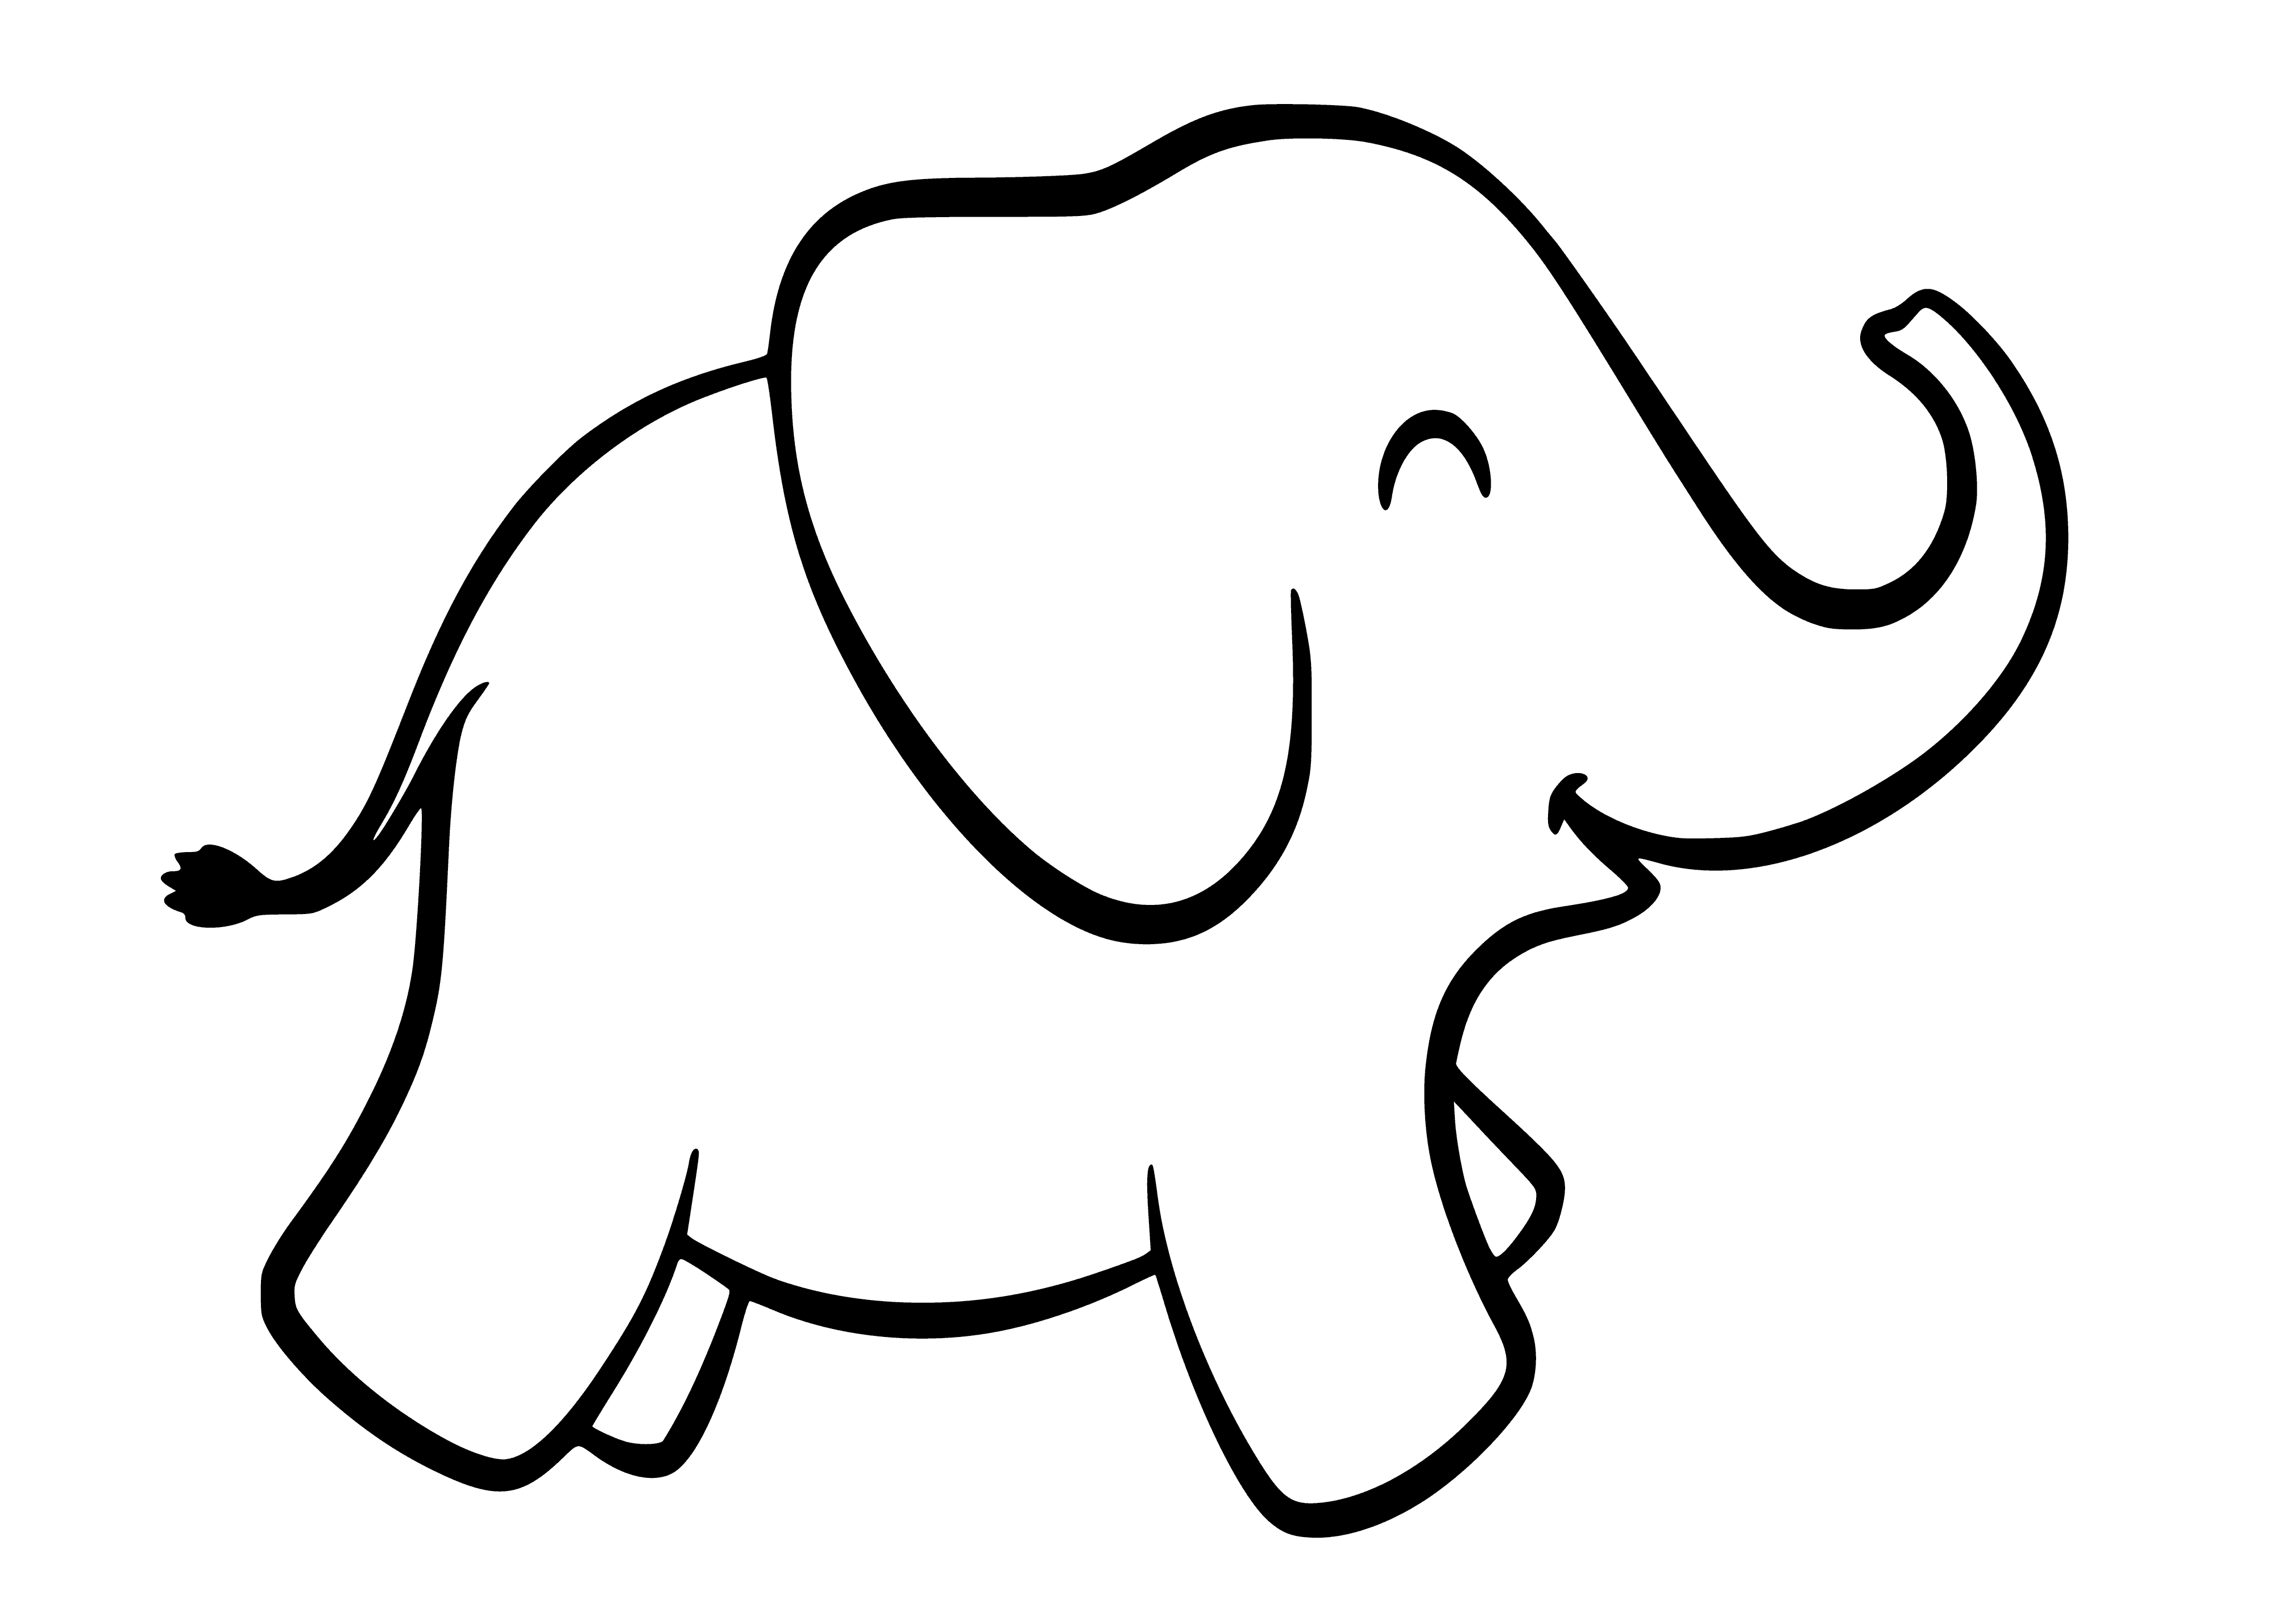 Elephant coloring page